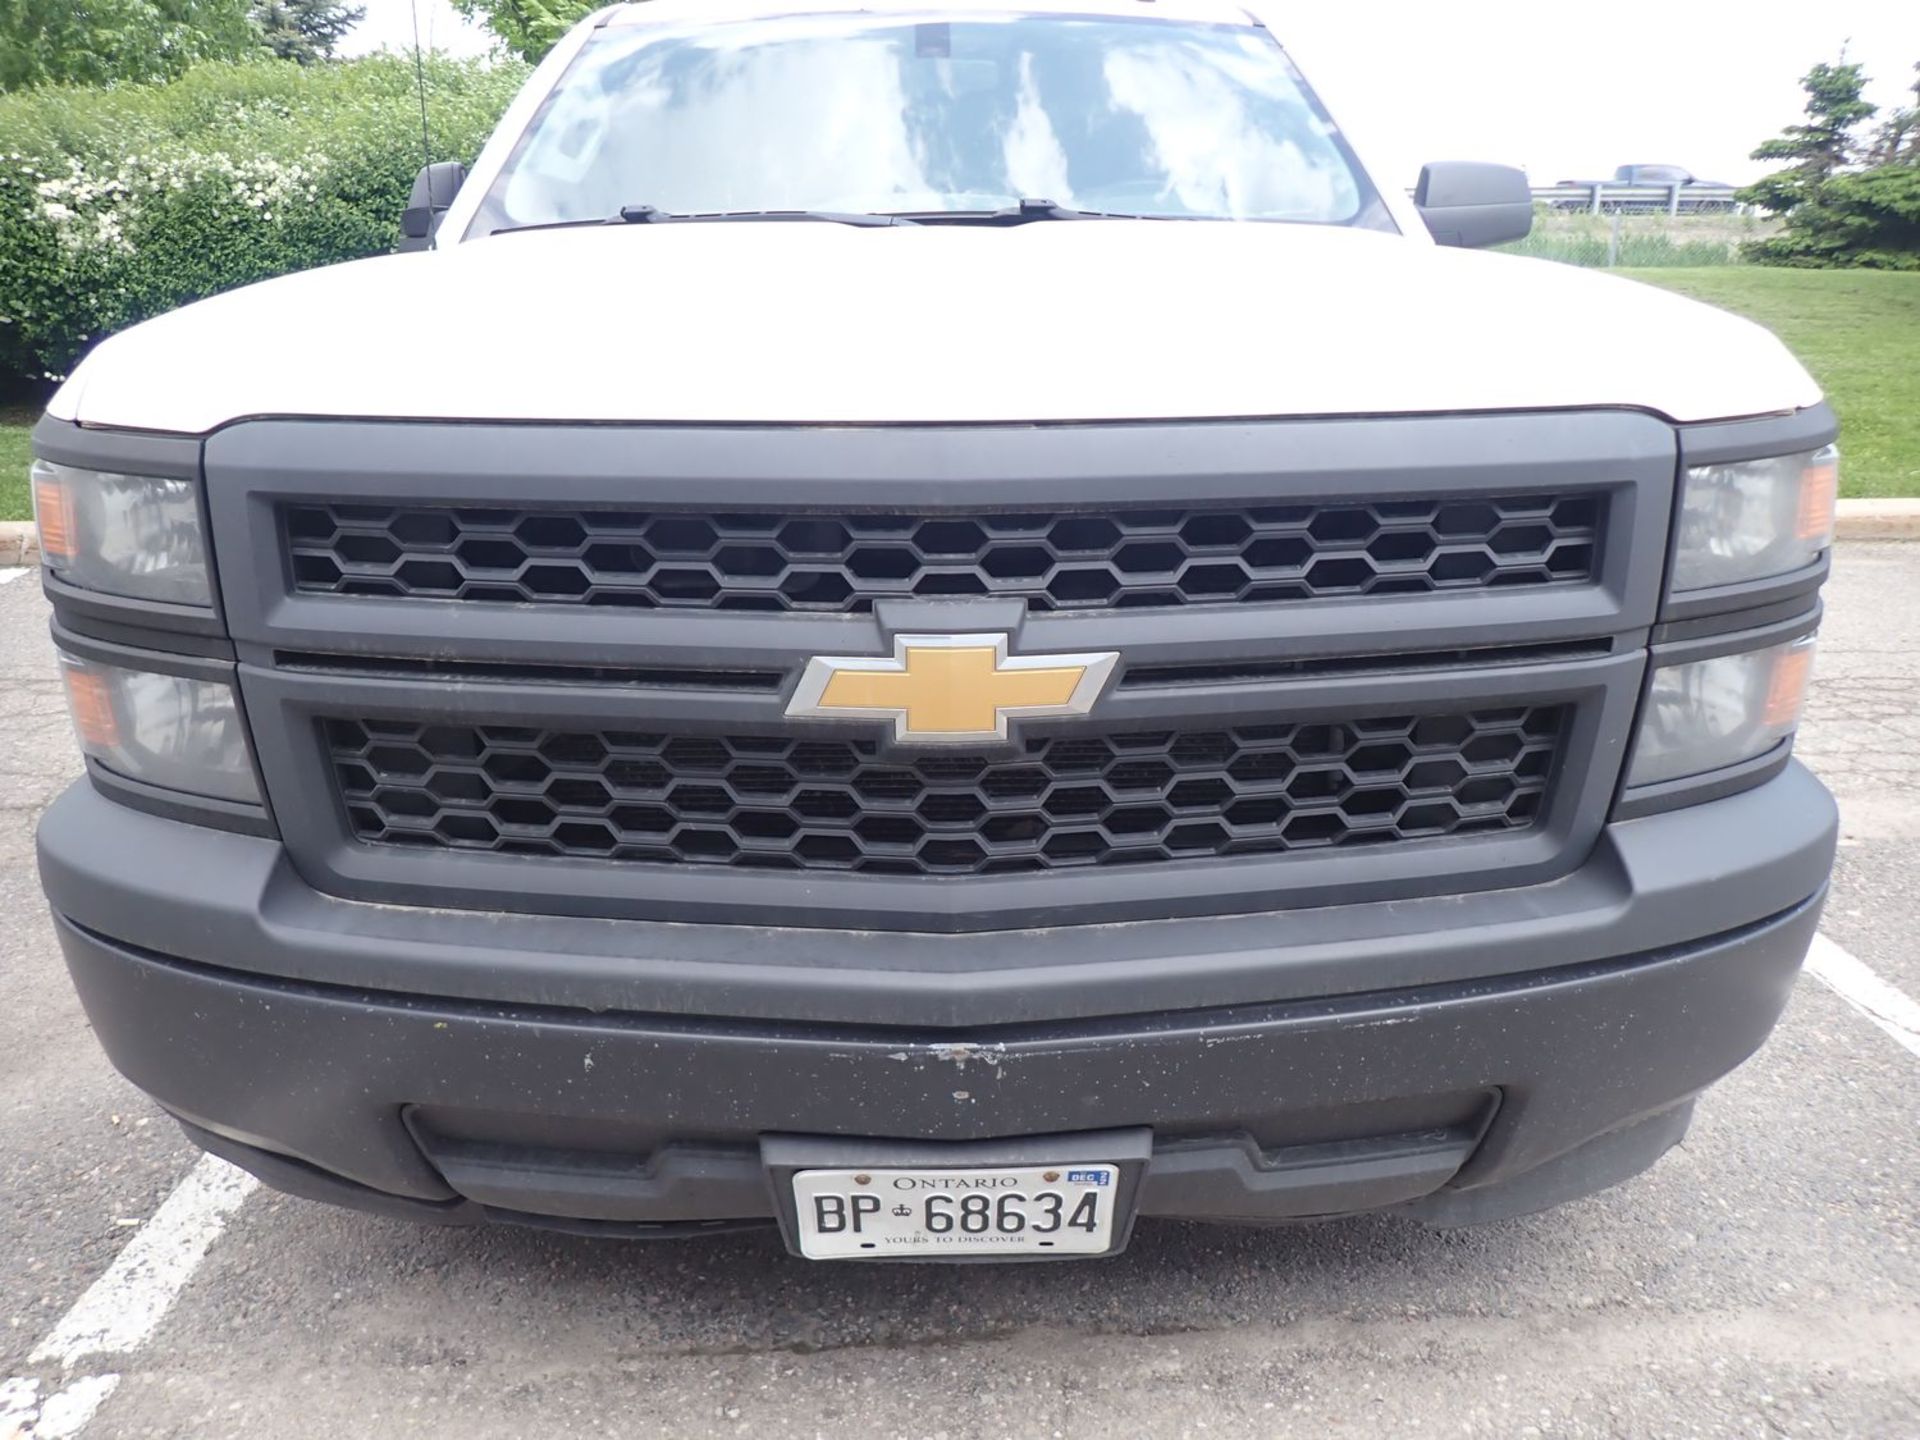 2015 CHEVROLET SILVERADO 1500 DOUBLE CAB 2WD PICKUP TRUCK, VIN 1GCRCPEH1FZ156736 (334,500 KM)(AS IS) - Image 2 of 13